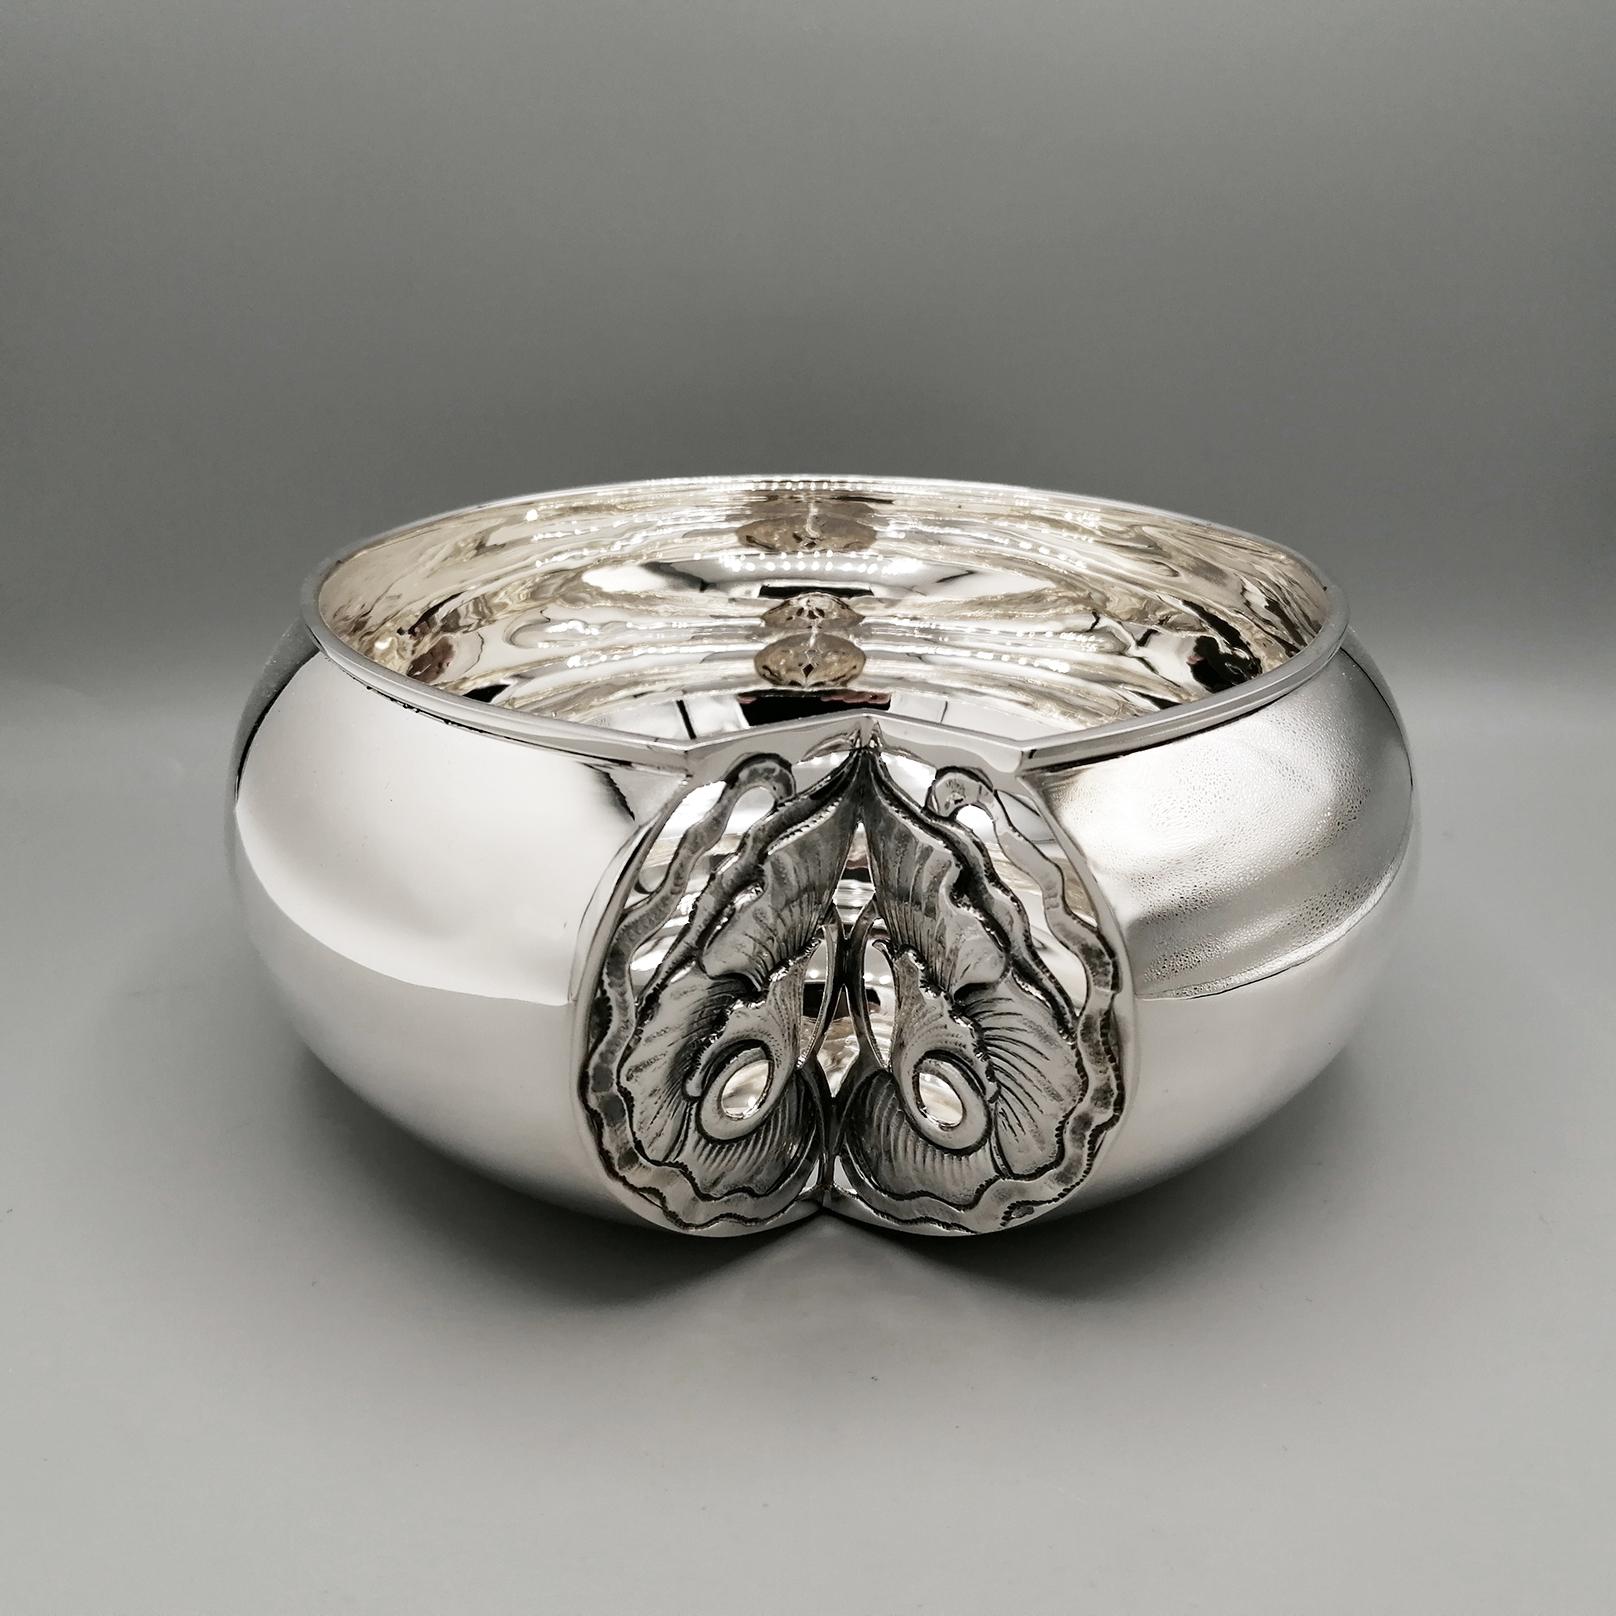 Round shaped sterling silver bowl.
The edge of the body of the bowl is markedly domed and abruptly interrupted by a section cut toward the inside of the triangular-shaped object.
A plaque with flowers, made with the fusion technique, was welded into